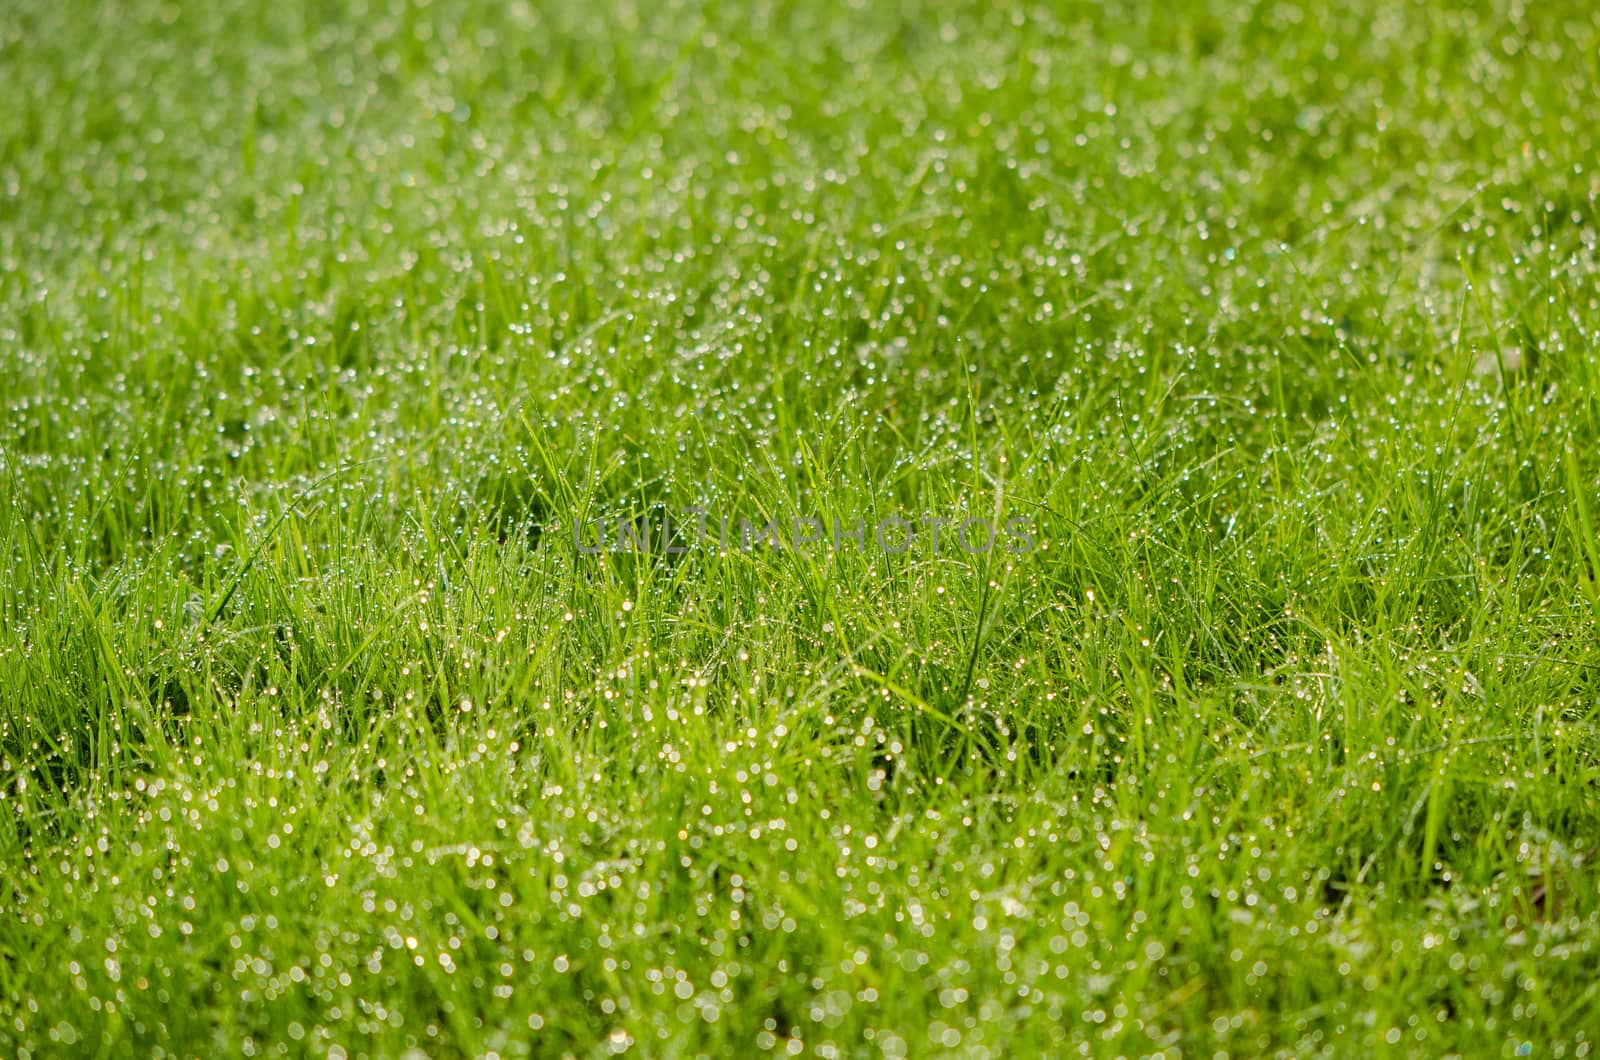 close up of green grass yard with many small dew drops in the early morning